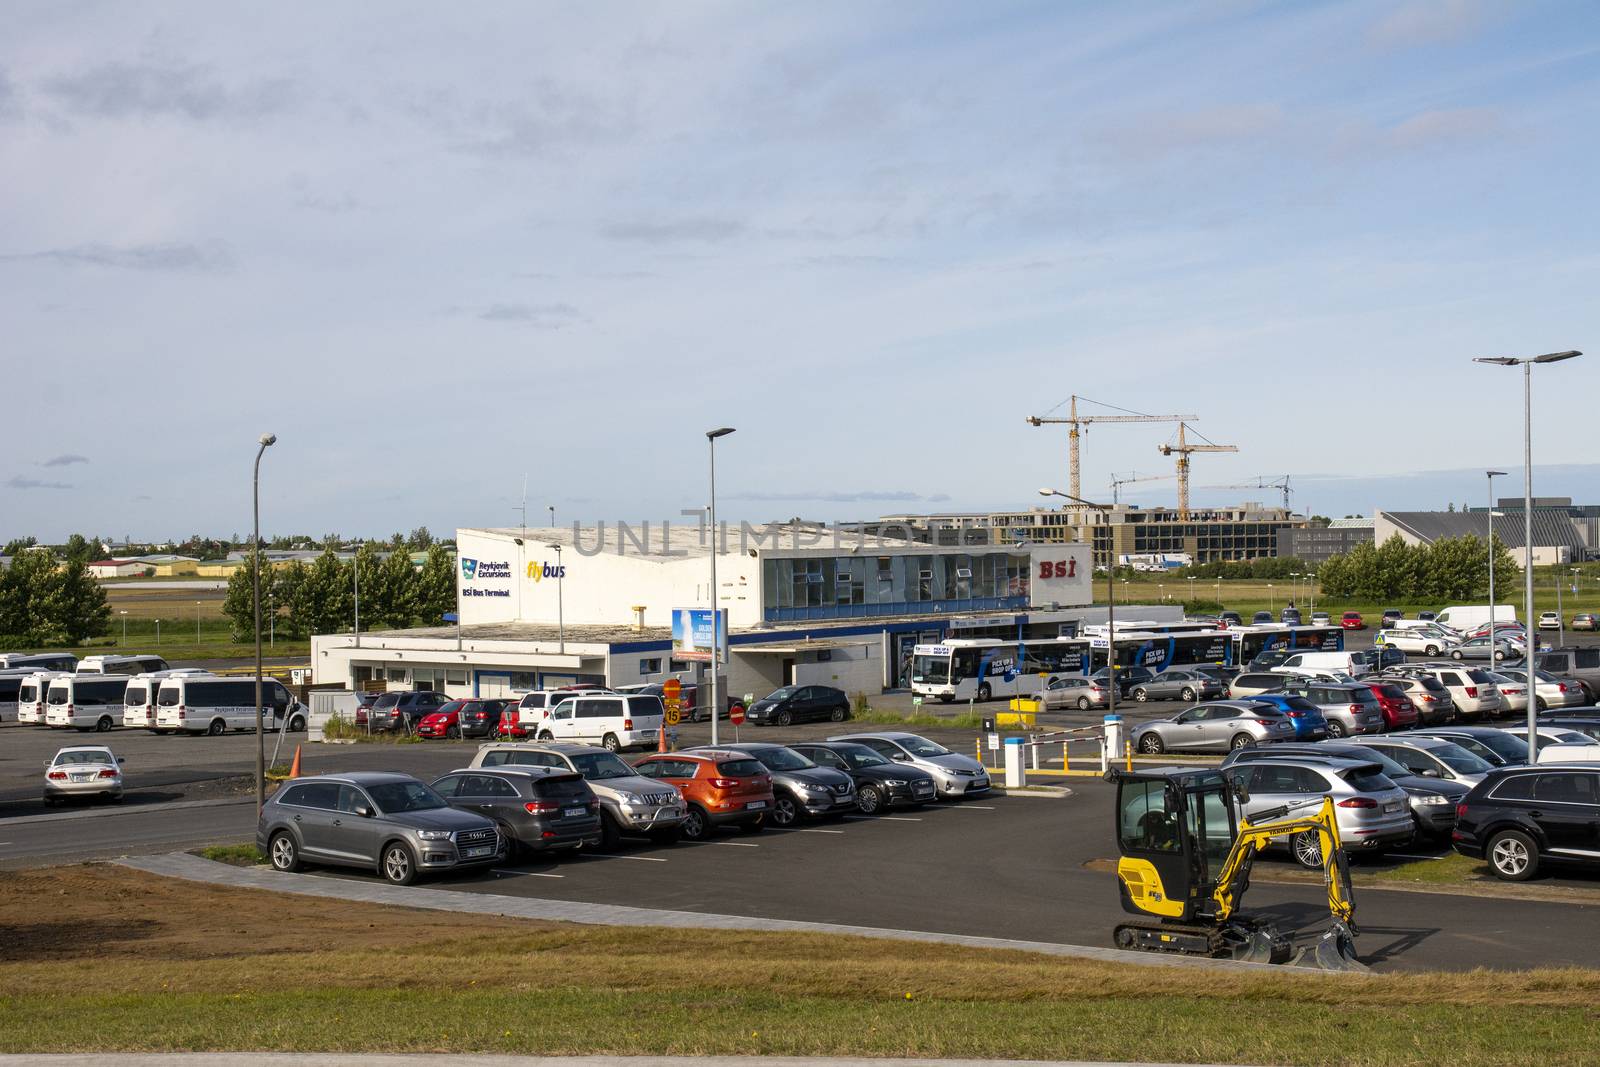 BSI bus terminal, Reykjavik Excursions and flybus parking lot and bus terminal by kb79